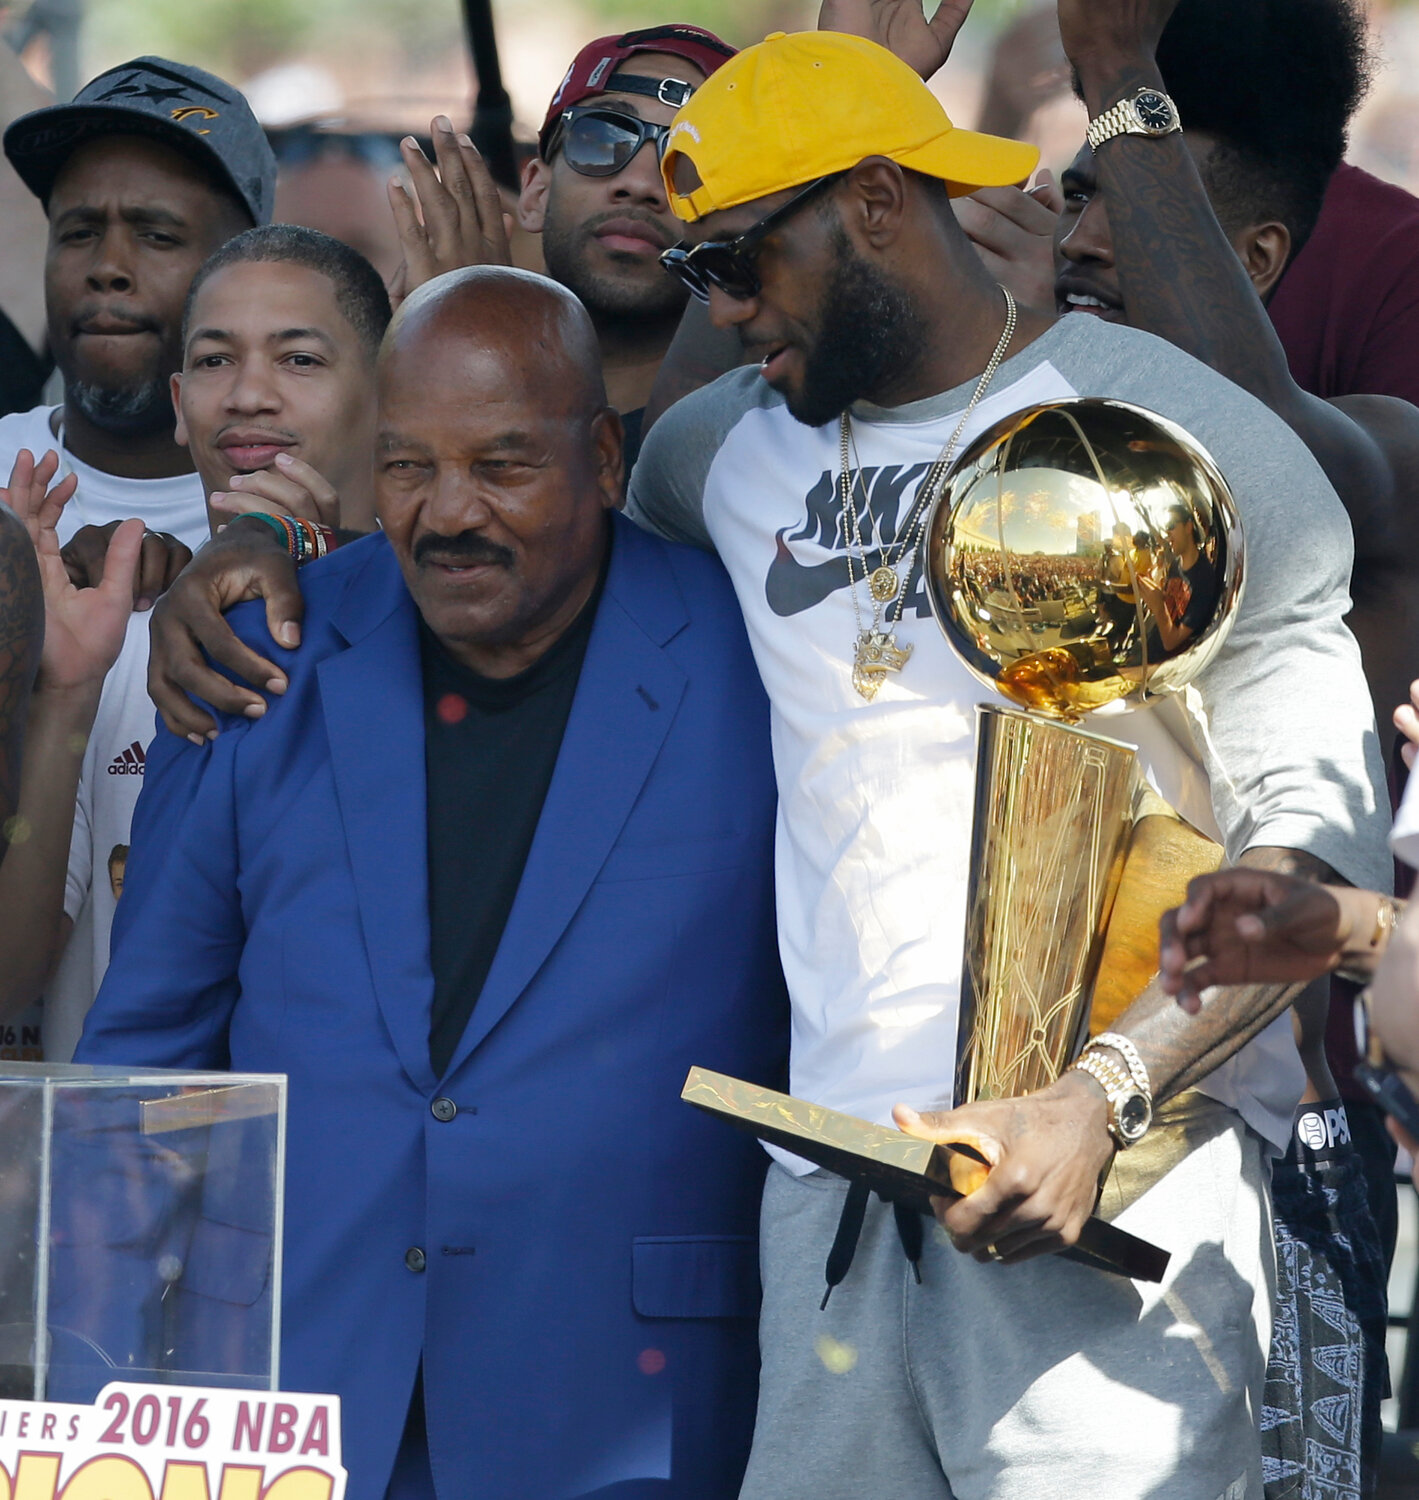 Former Cleveland Browns player Jim Brown, left, gets a hug from LeBron James, who holds the Larry O'Brien NBA championship trophy during a rally June 22, 2016, in Cleveland. “I hope every Black athlete takes the time to educate themselves about this incredible man and what he did to change all of our lives,” James posted shortly after Brown's death. ”We all stand on your shoulders Jim Brown. If you grew up in Northeast Ohio and were Black, Jim Brown was a God."